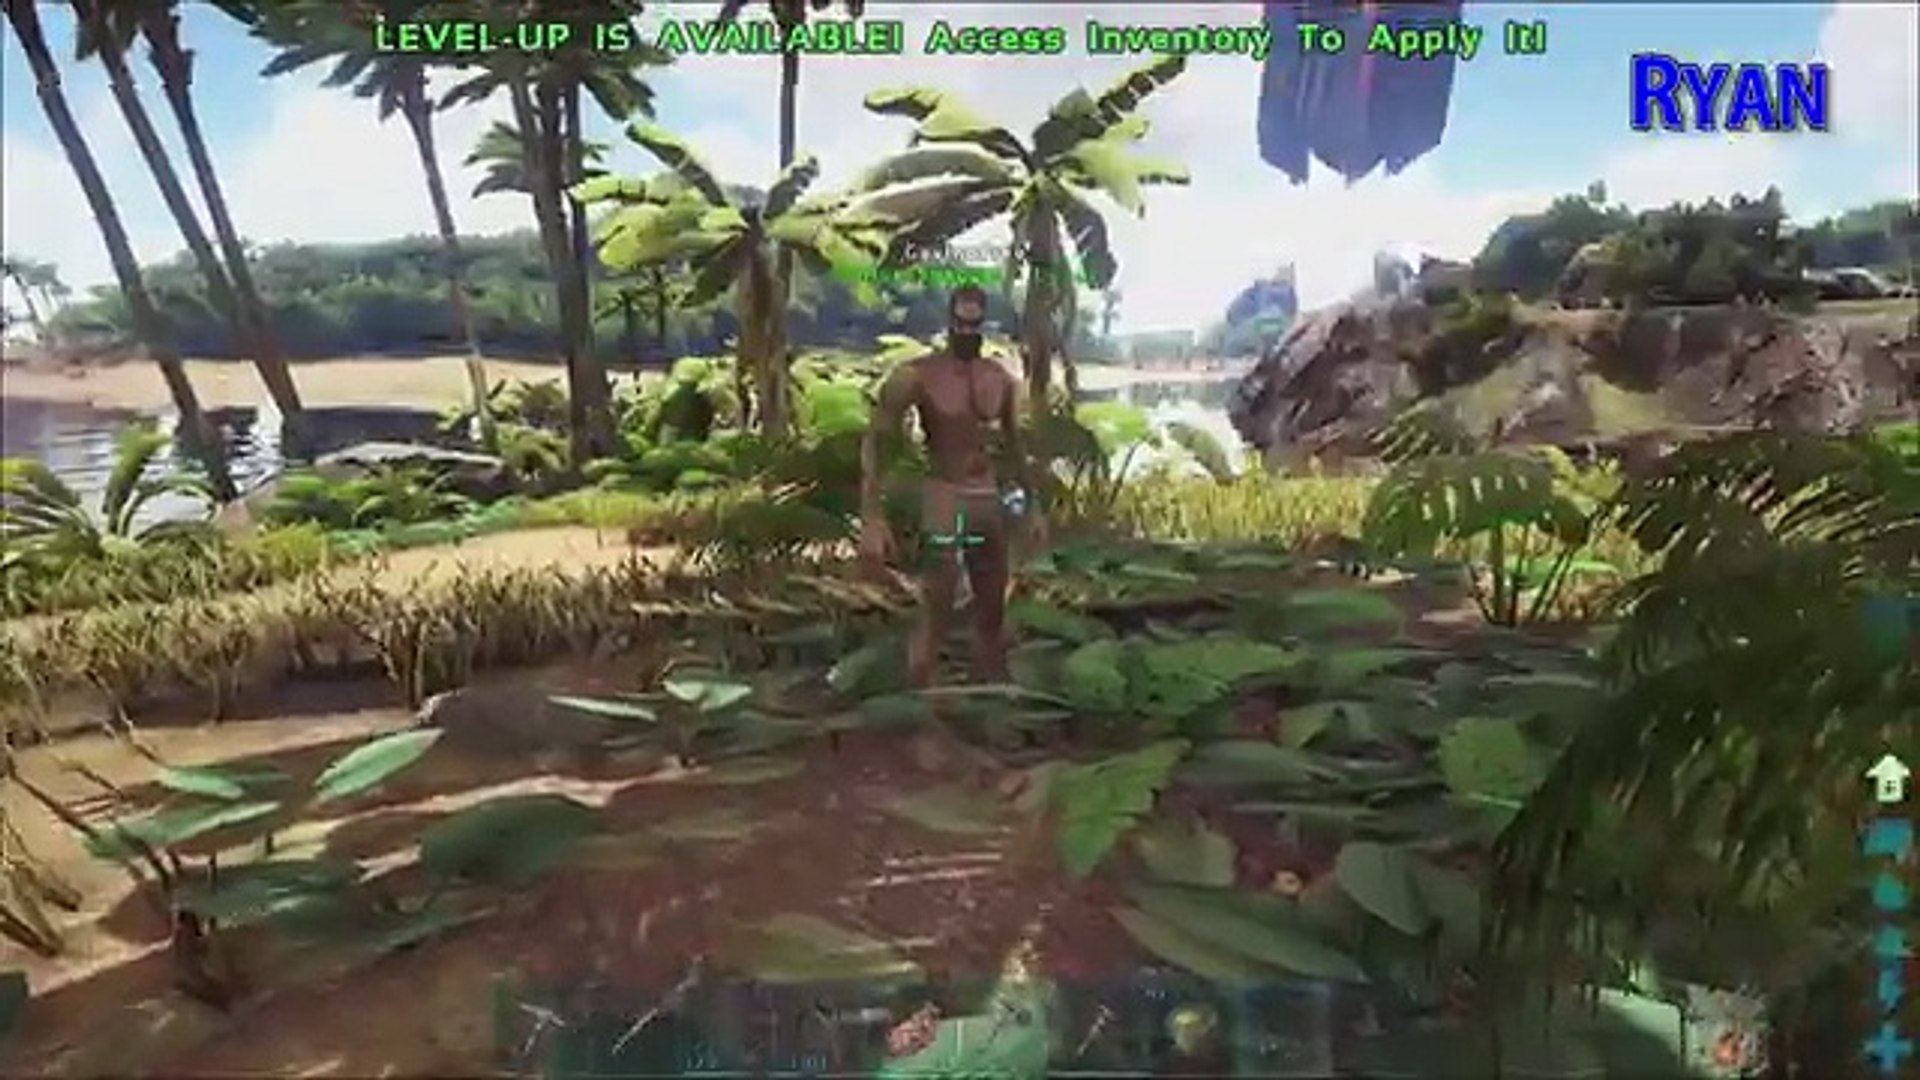 The Jellyfish Incident - Ark: Survival Evolved (#2)